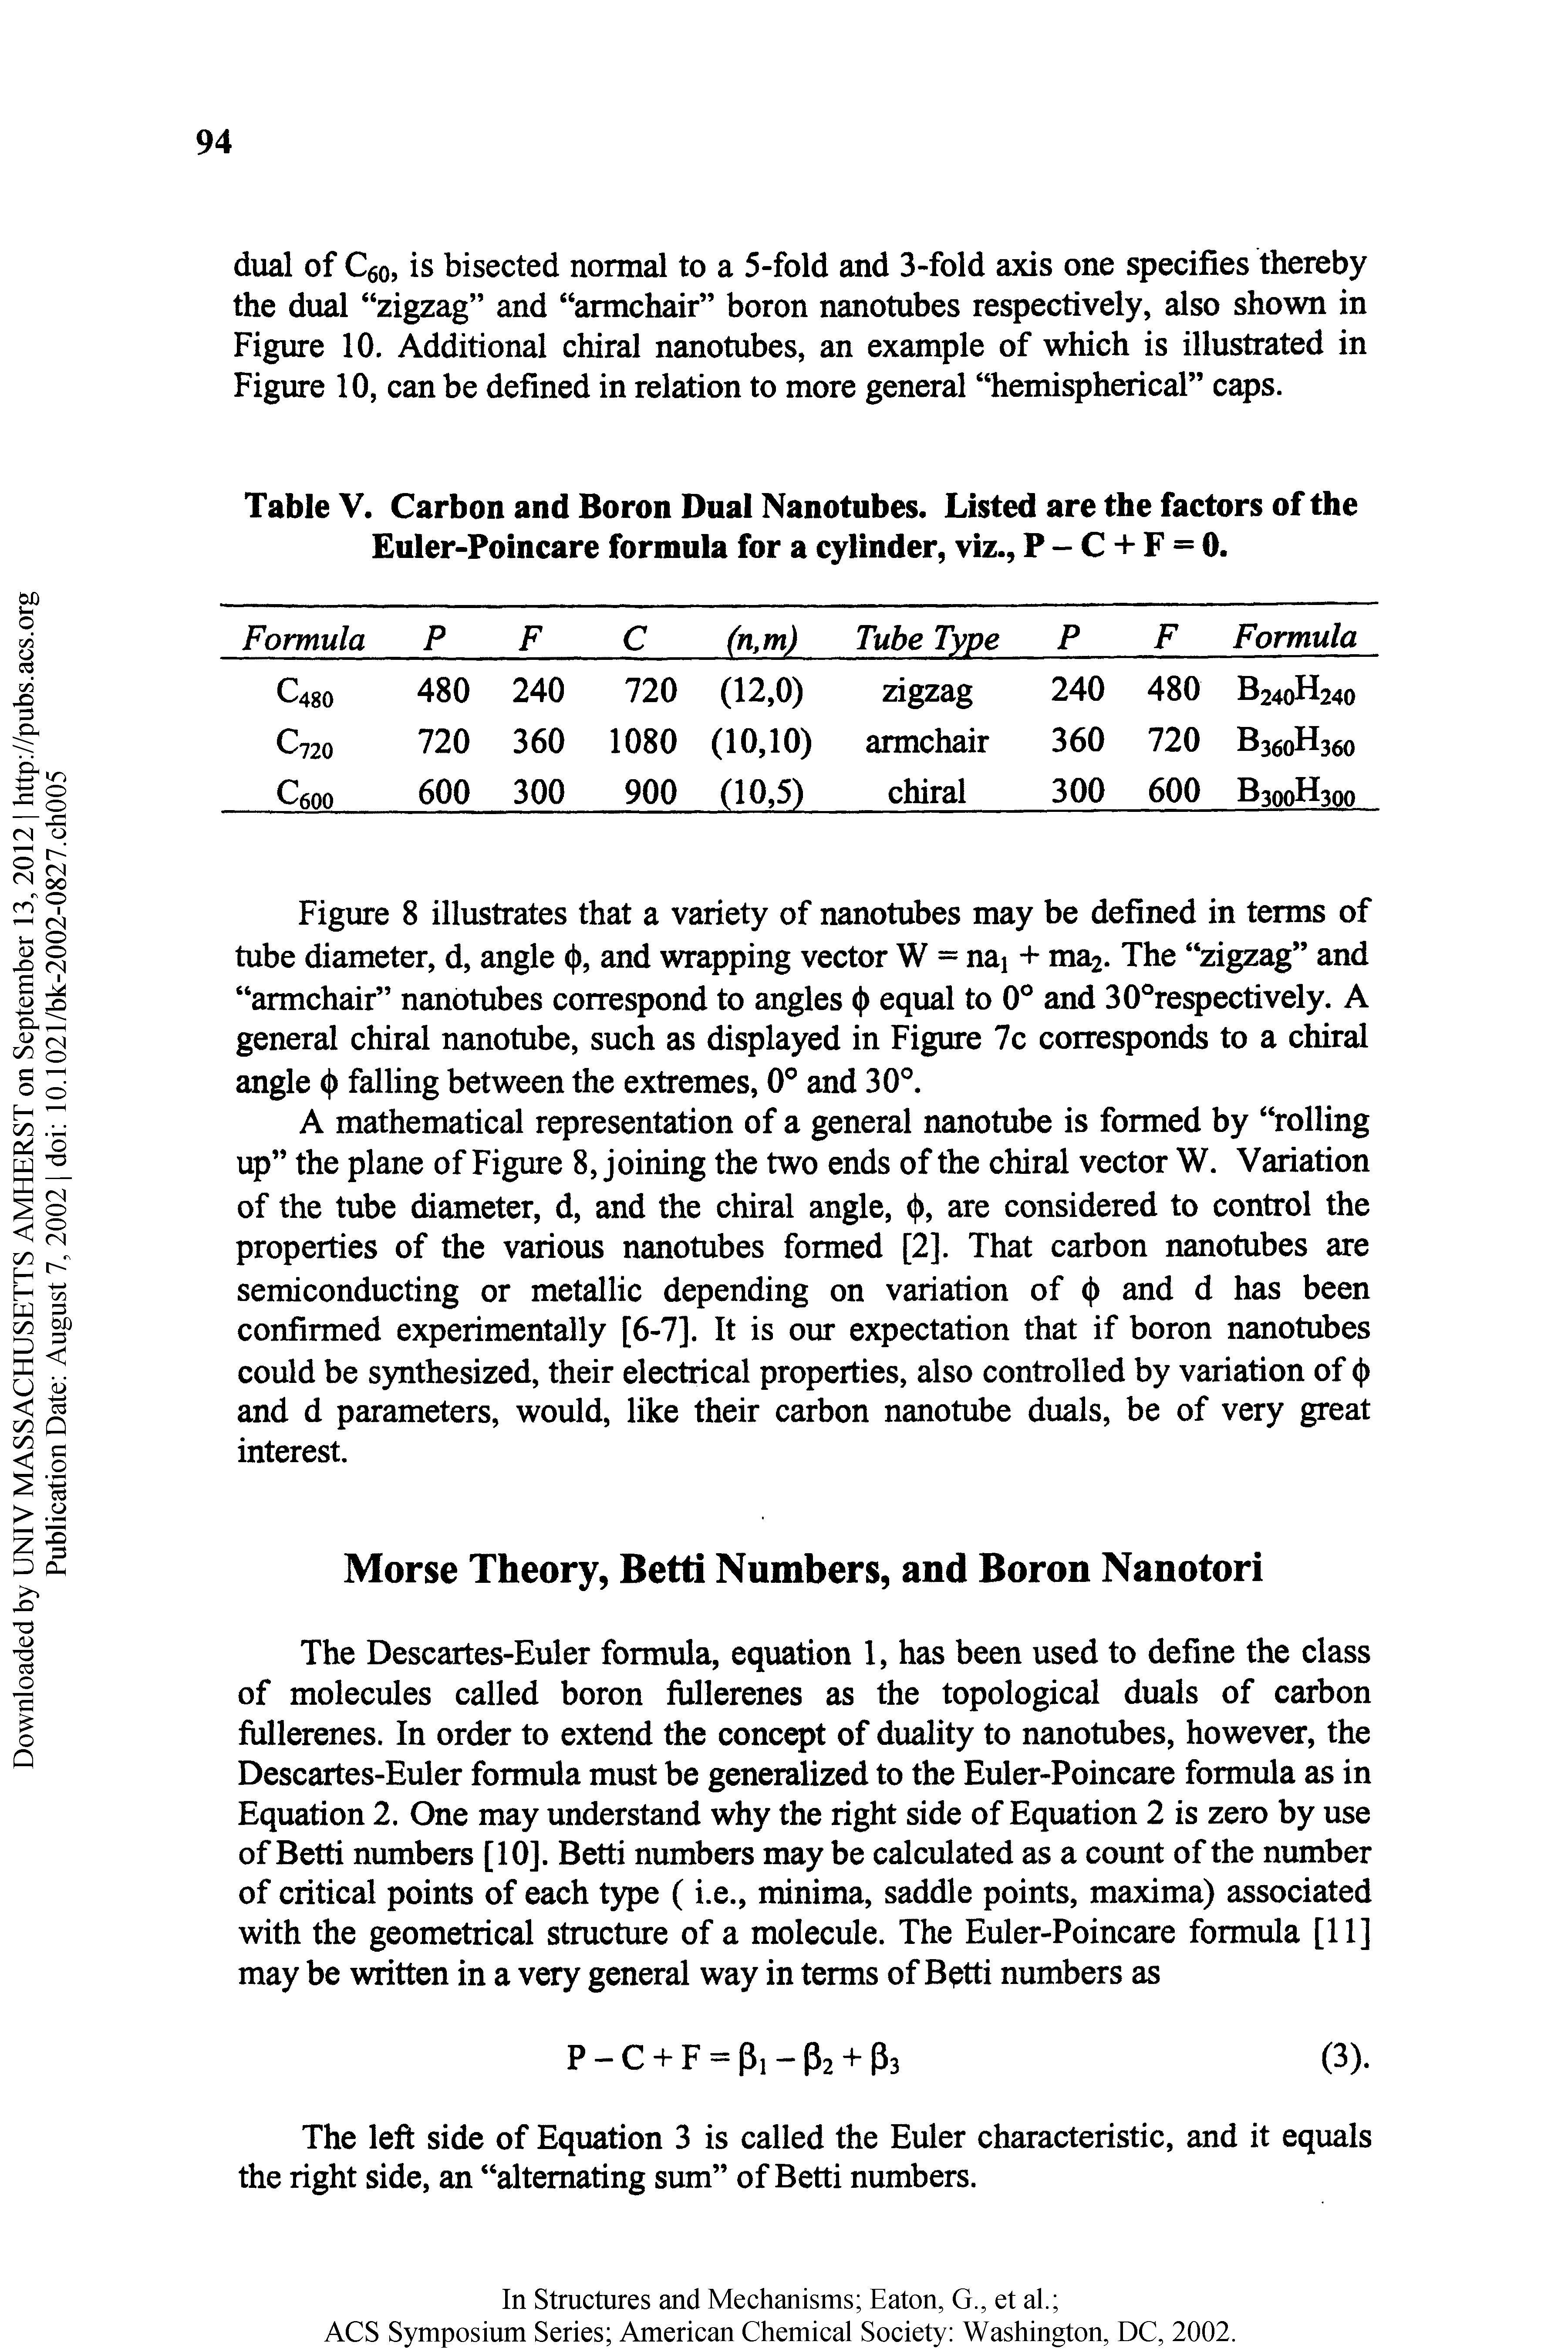 Table V. Carbon and Boron Dual Nanotubes. Listed are the factors of the Euler-Poincare formula for a cylinder, viz., P - C + F = 0.